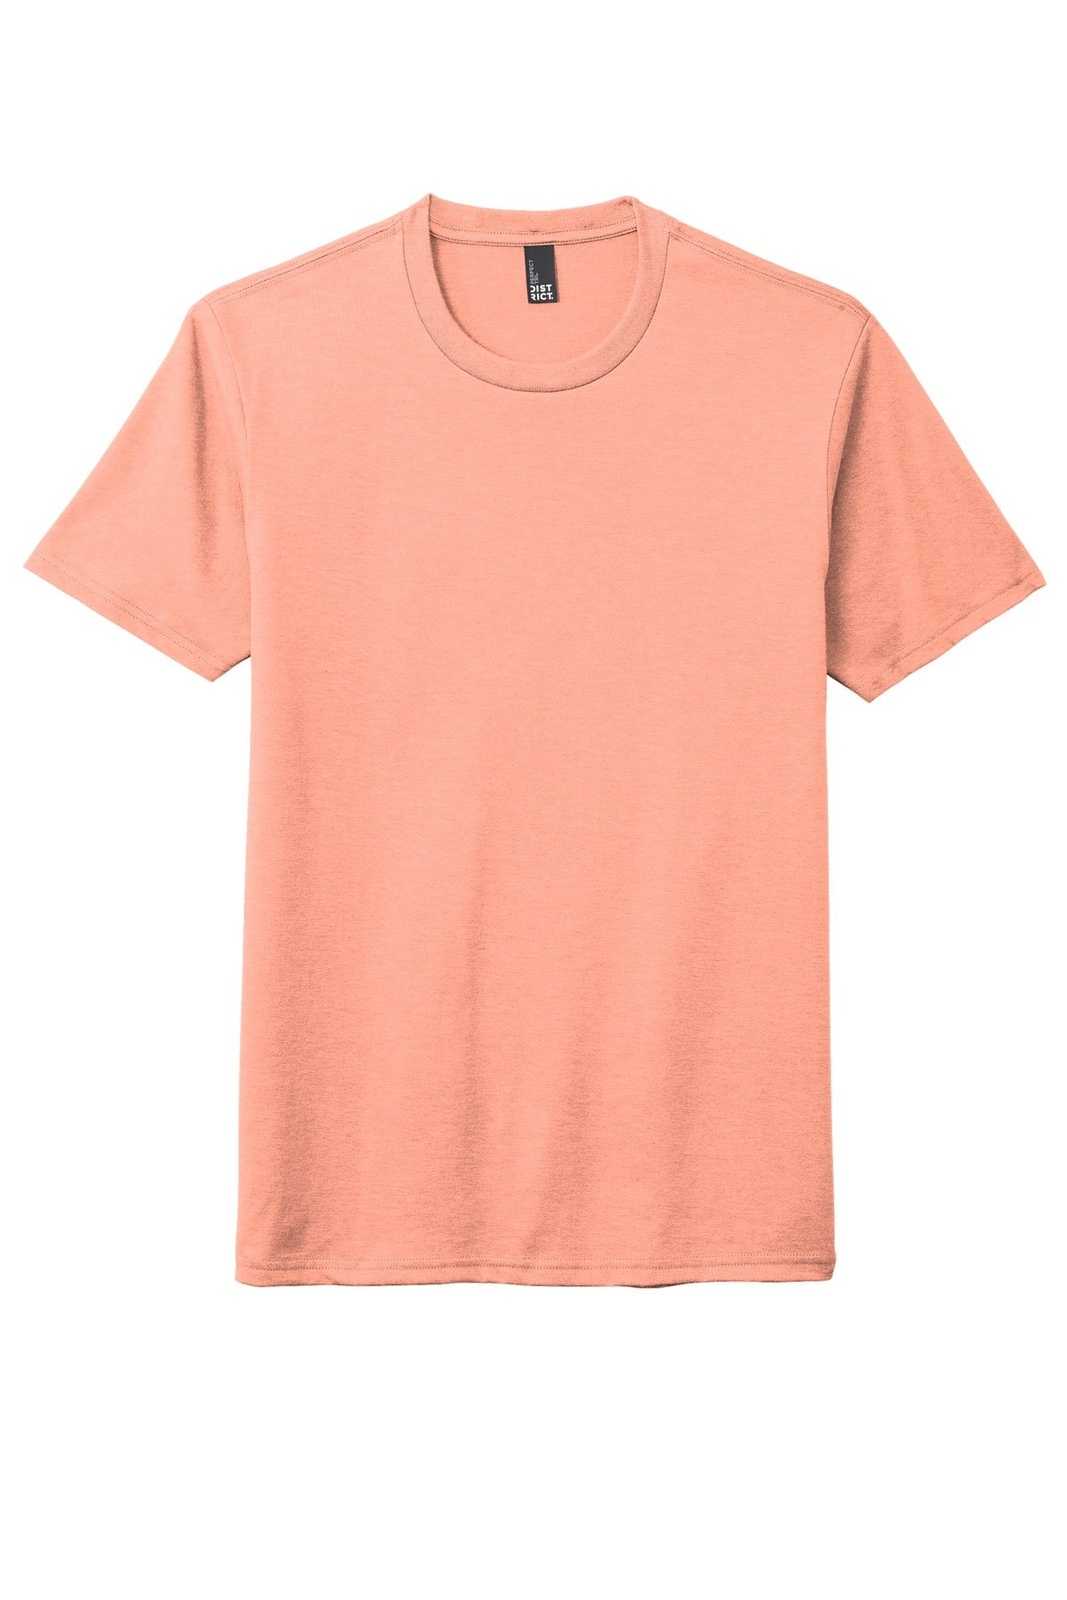 District DM130 Perfect Tri Tee - Heathered Dusty Peach - HIT a Double - 5